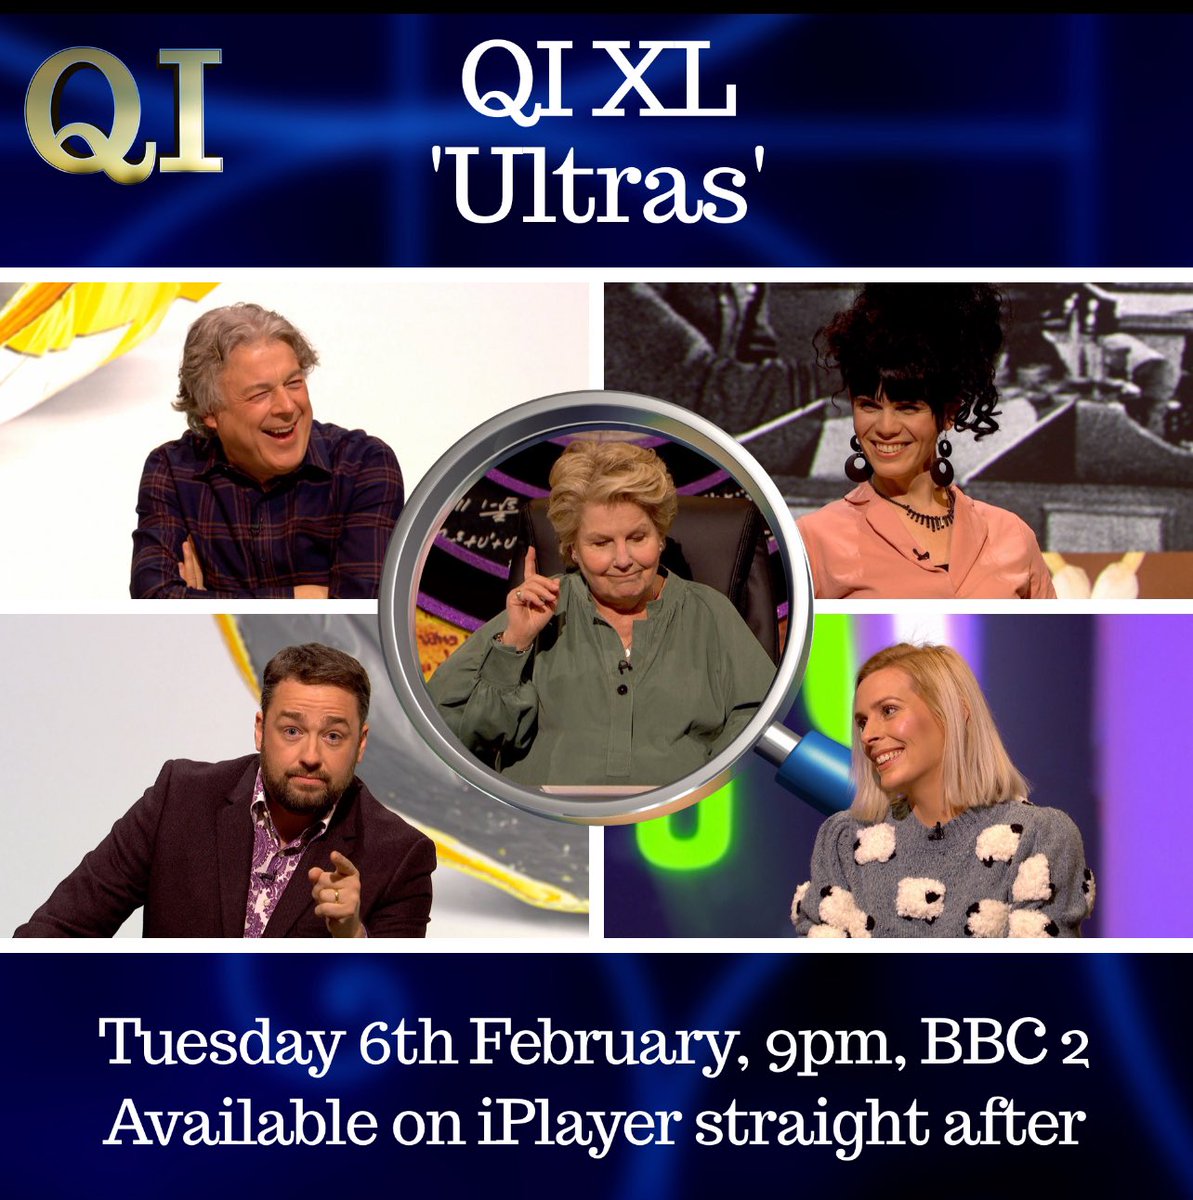 Tomorrow is an ULTRA-interesting episode of @qikipedia with Jordan Gray, Jason Manford, Sara Pascoe and Alan Davies! Don’t miss it - 9pm on @BBCTwo and @BBCiPlayer following!